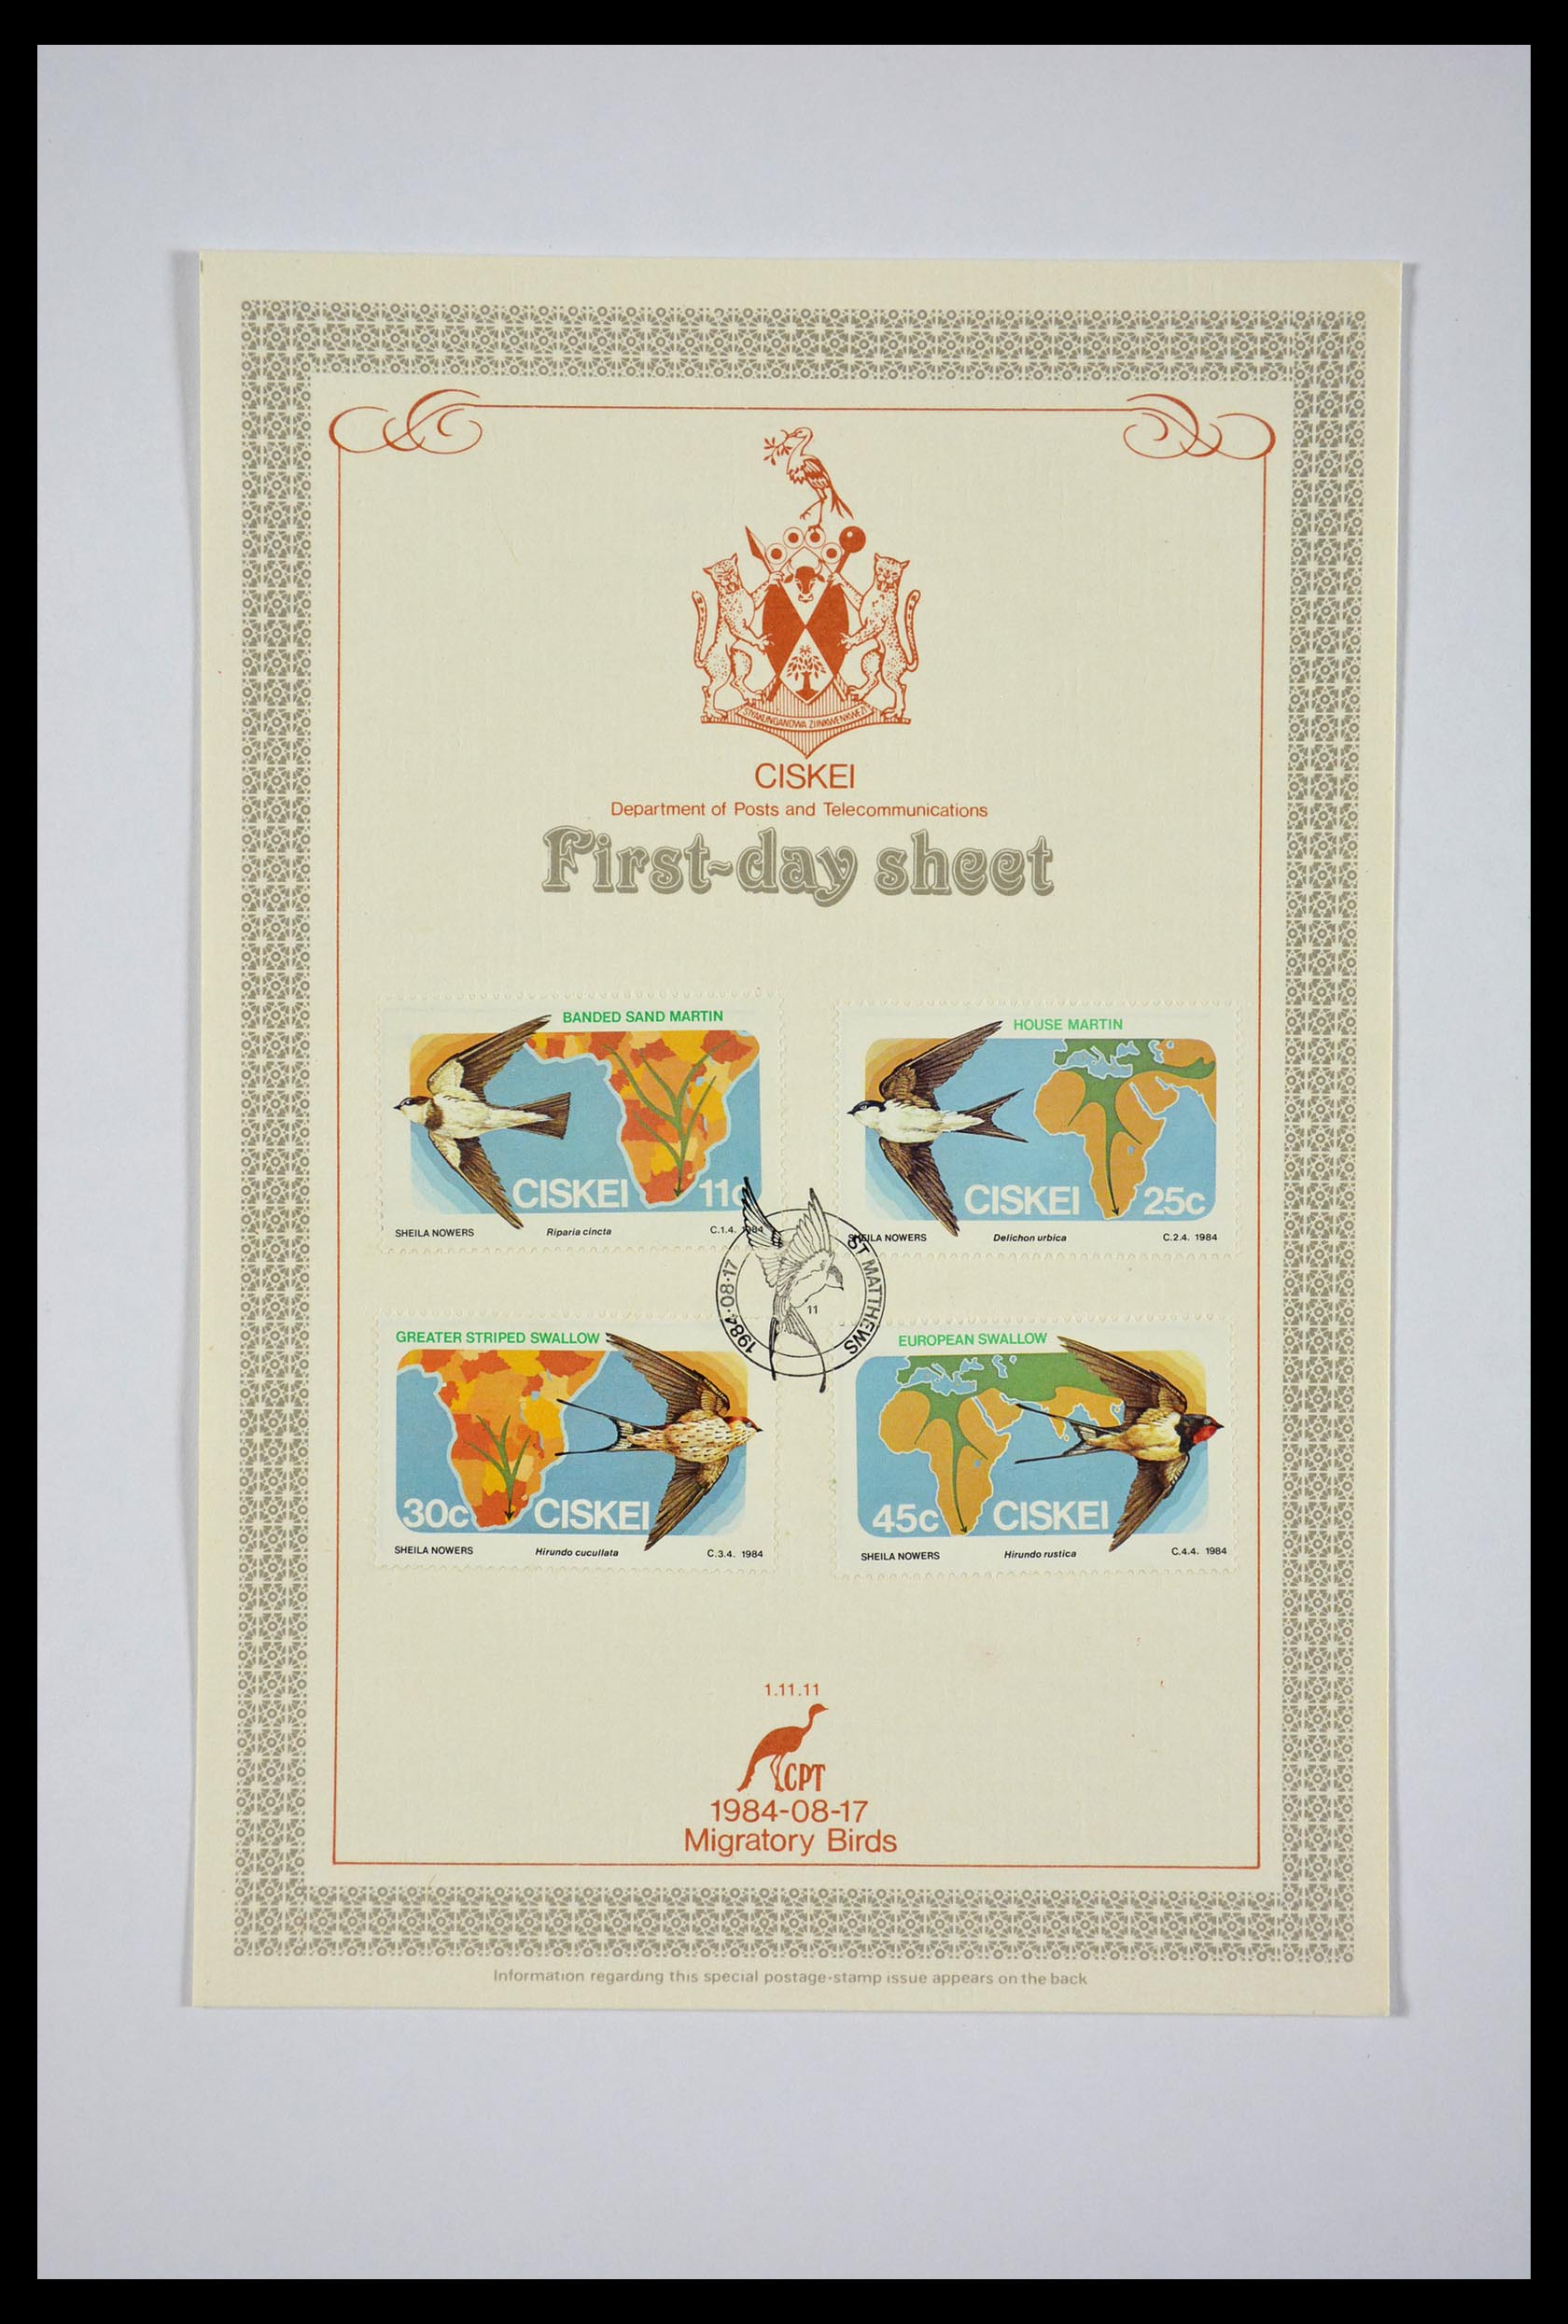 29356 042 - 29356 South Africa homelands first day covers 1979-1991.